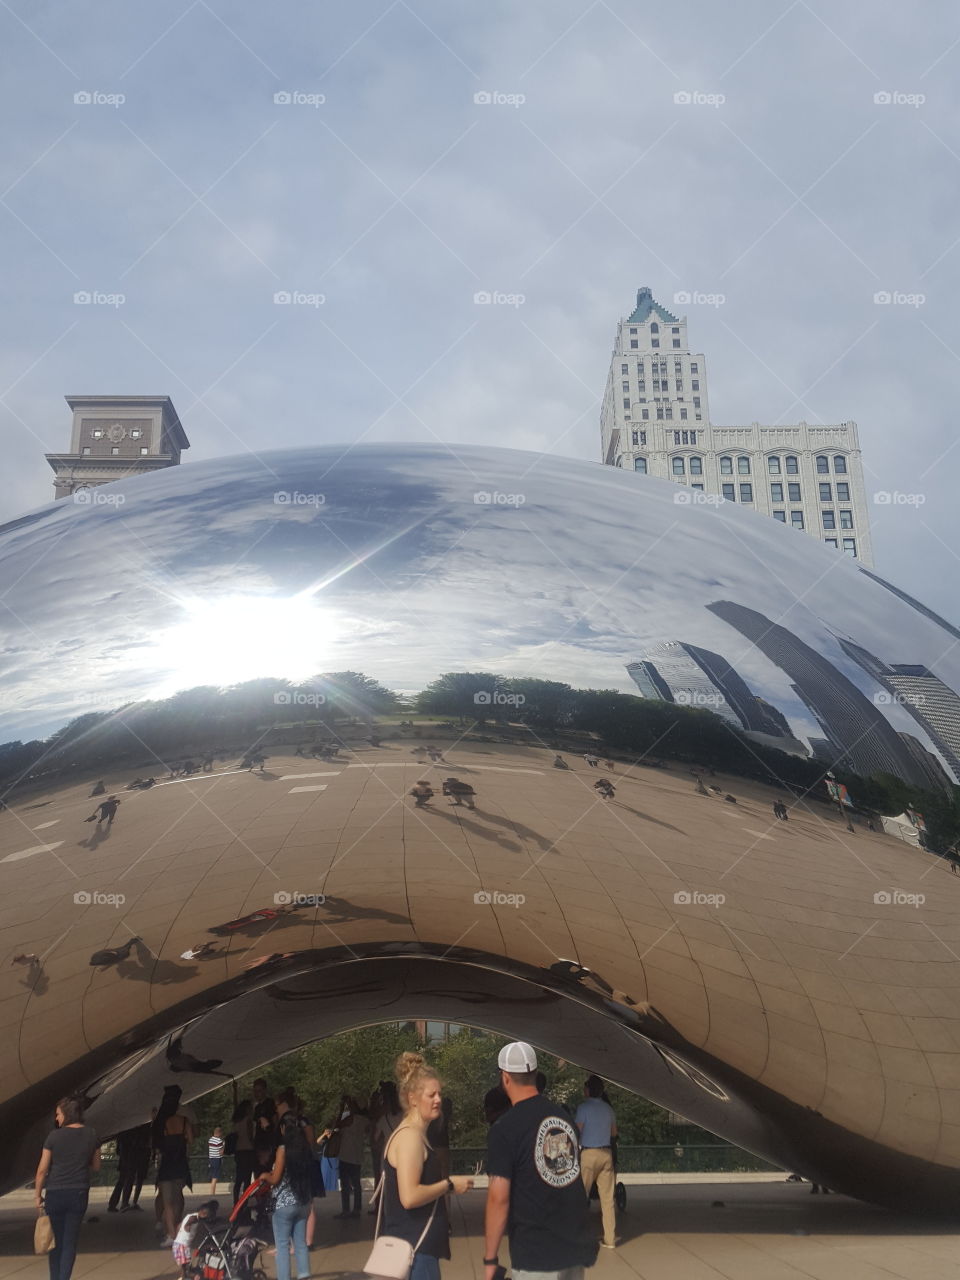 I was just having a great while visiting the bean in Chicago